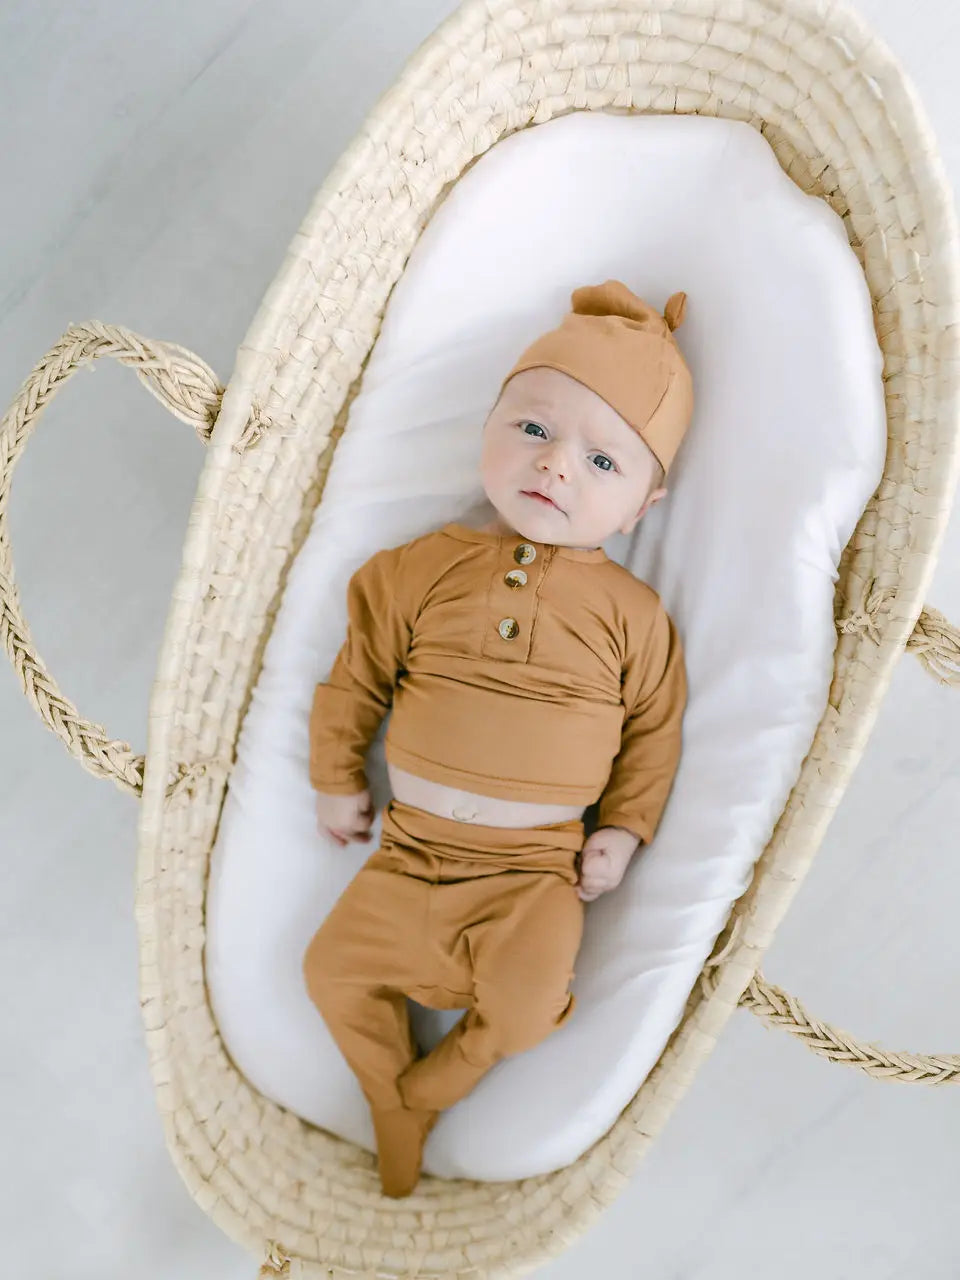 Top & Bottom Baby Outfit (Newborn - 3 months) - Camel